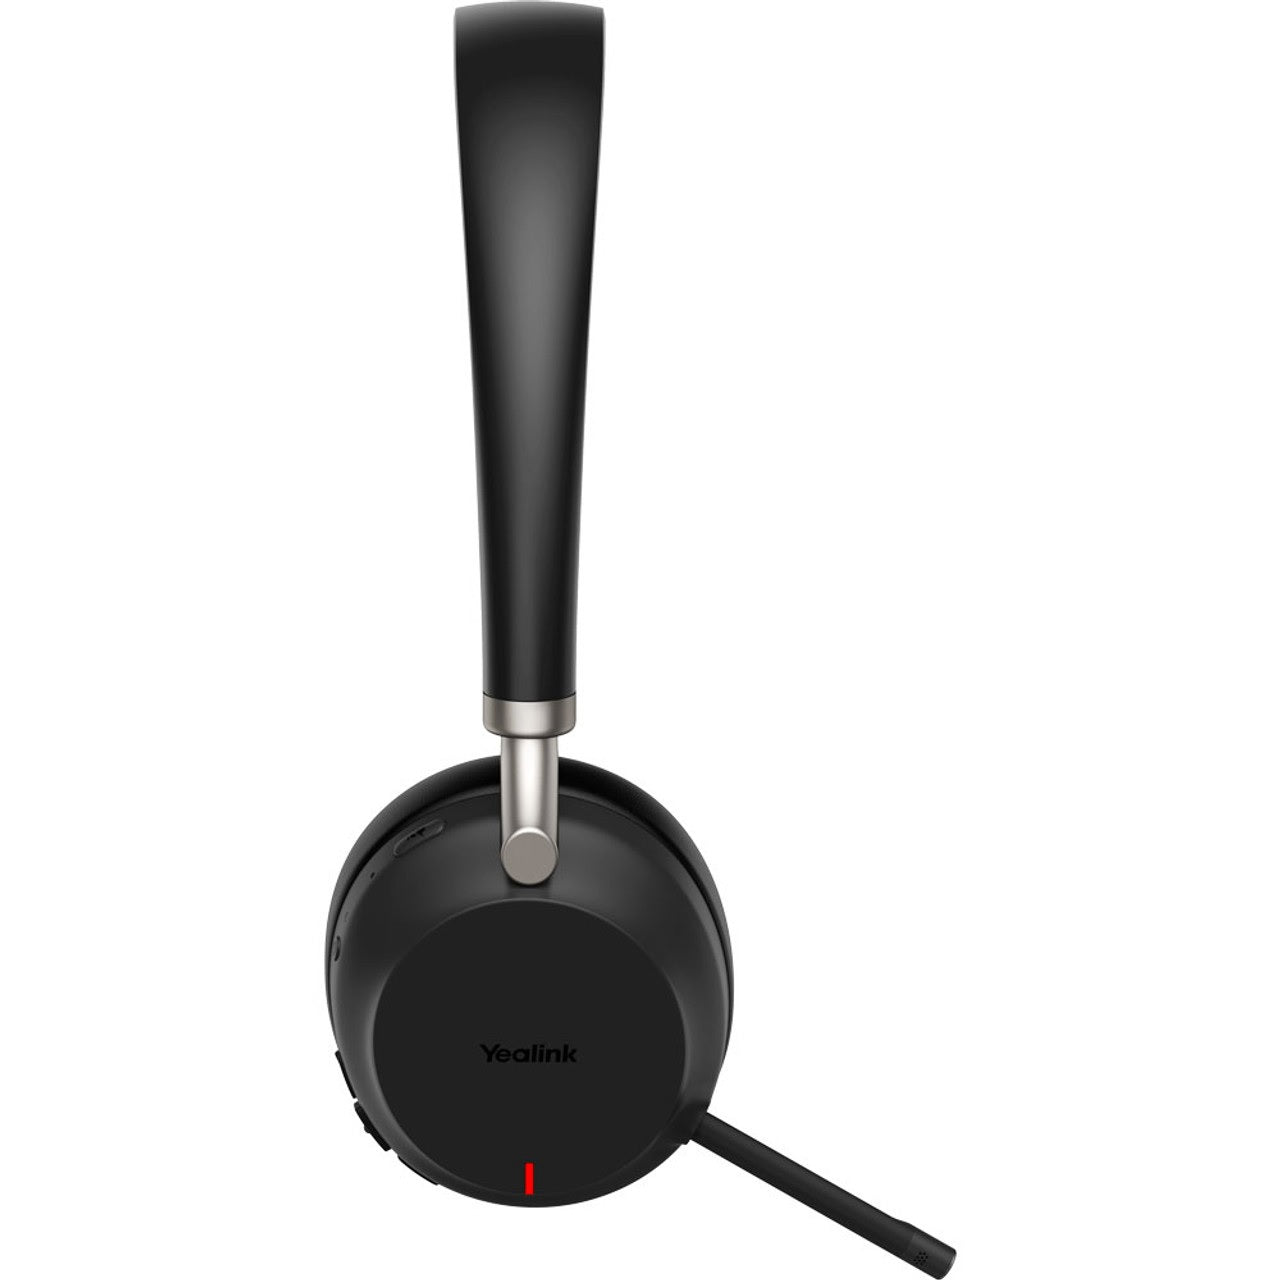 Yealink-BH72-Bluetooth-Wireless-Headset-With-Stand-Teams-Black-90-DEGREE